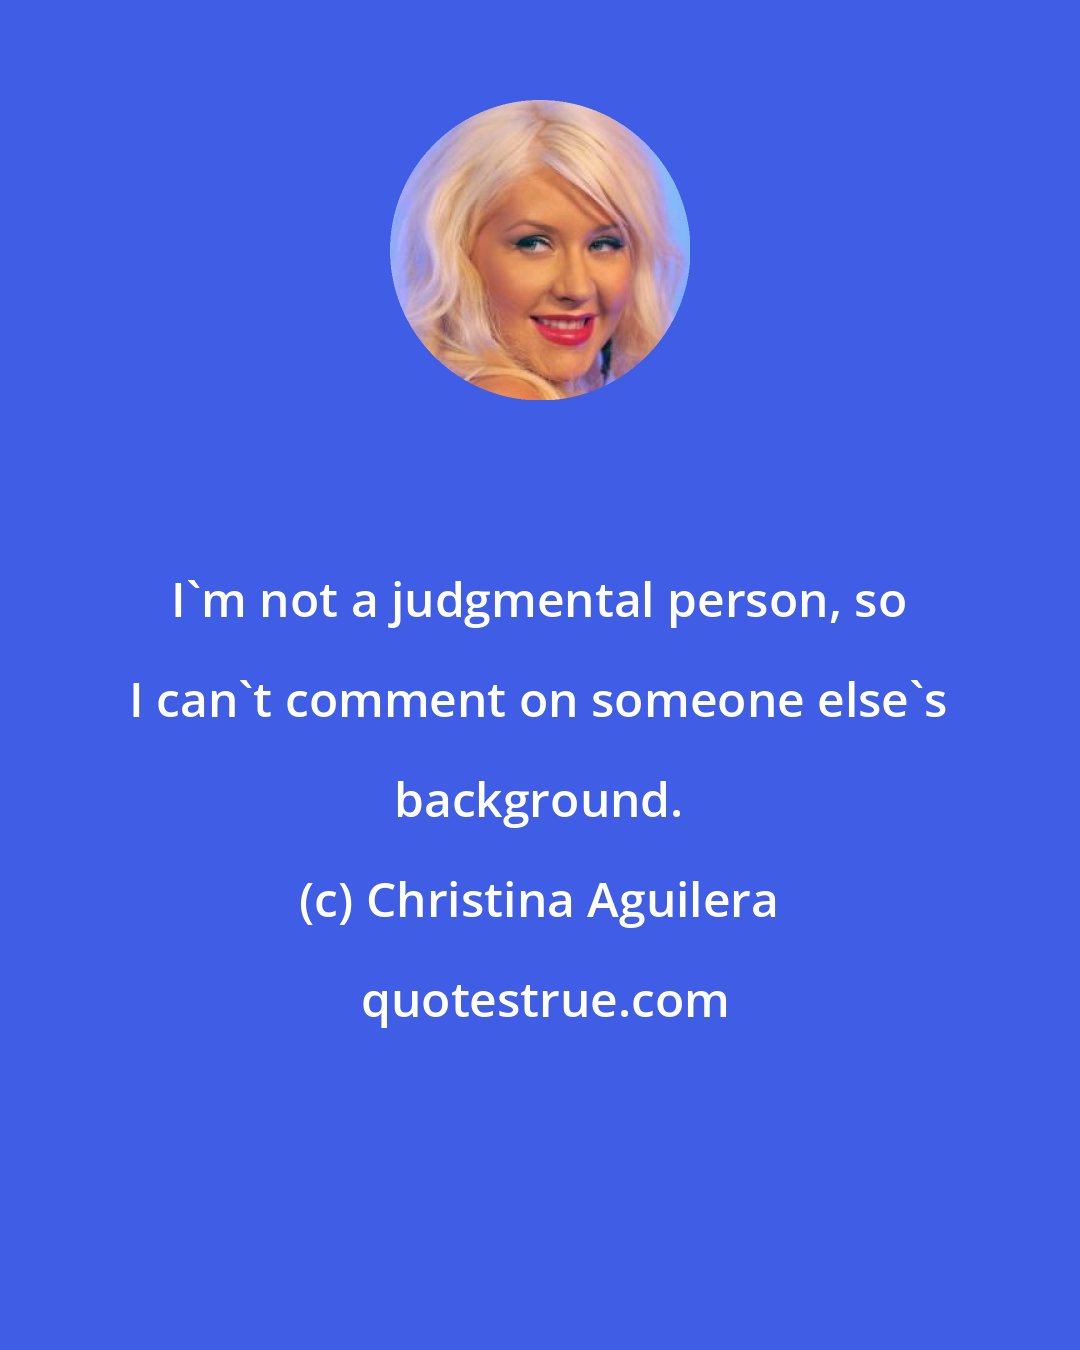 Christina Aguilera: I'm not a judgmental person, so I can't comment on someone else's background.